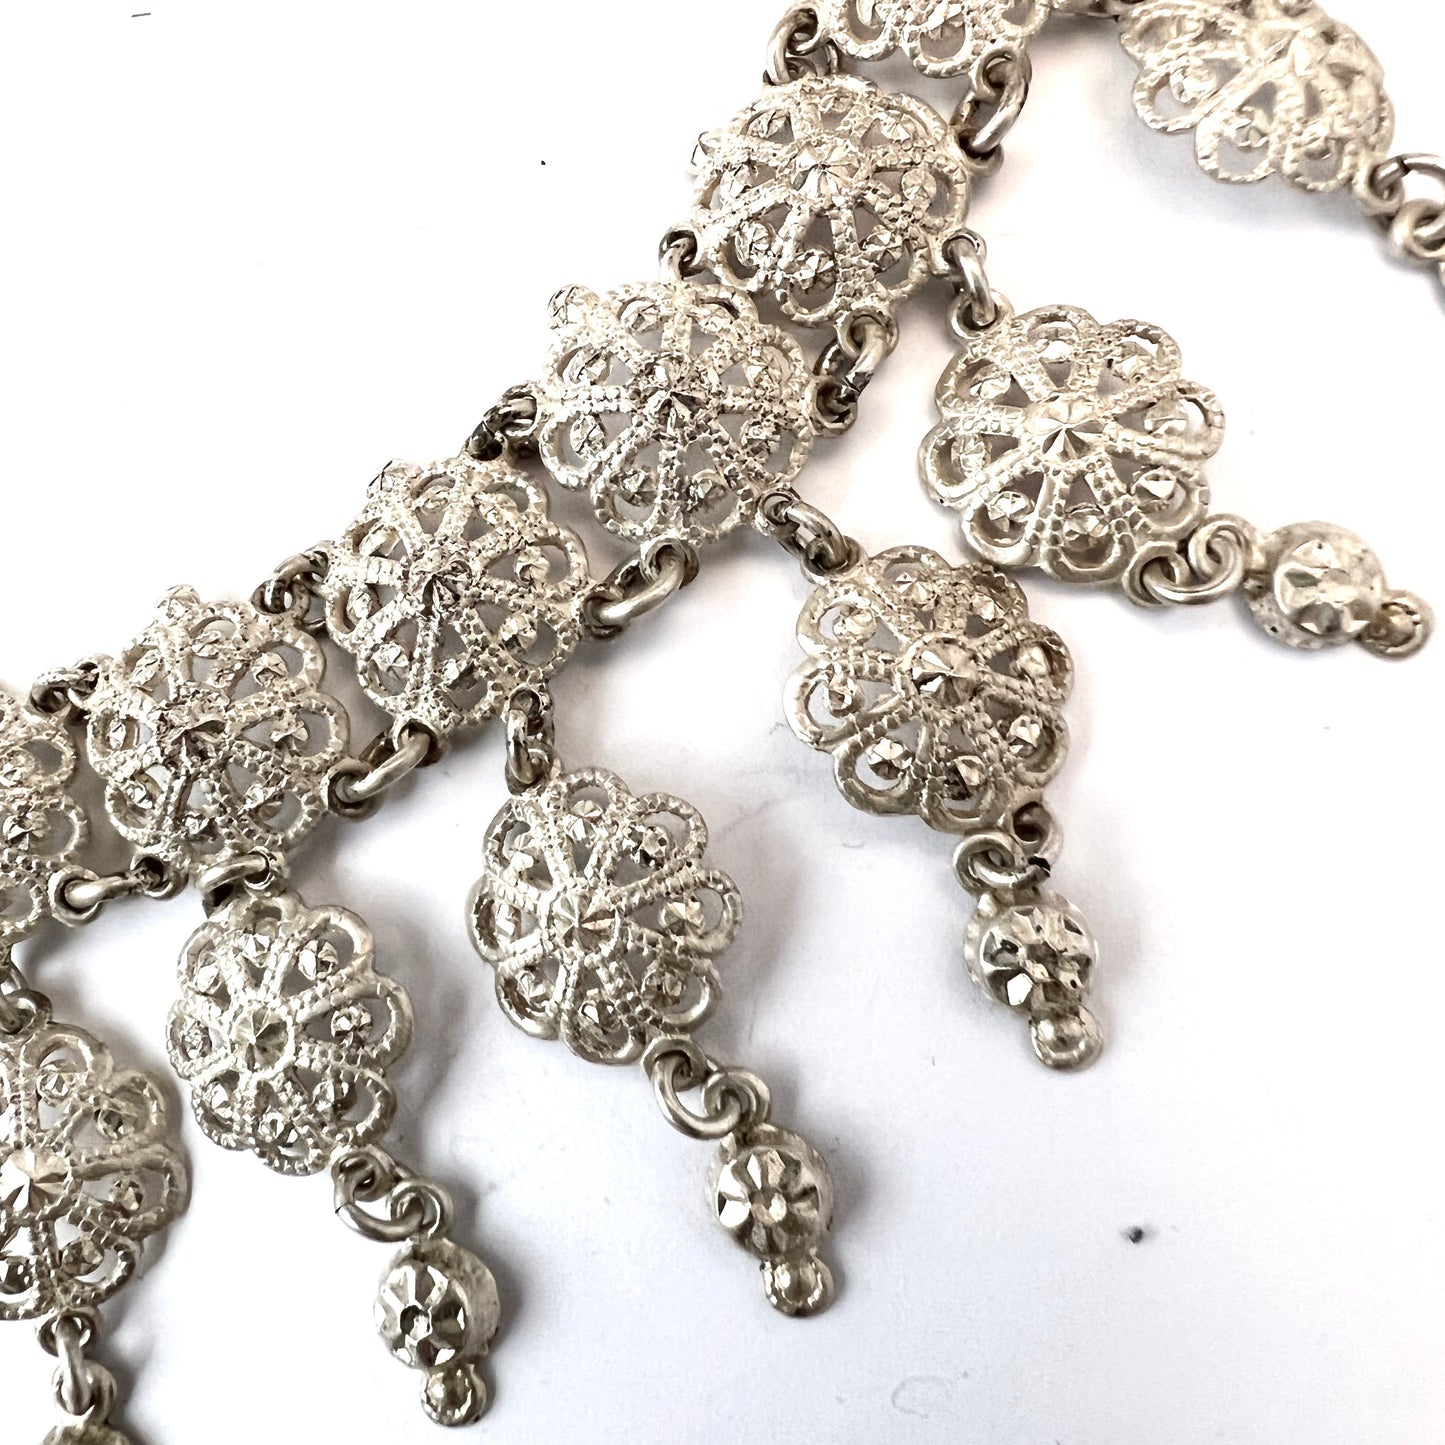 Sweden early 1900s. 830 Silver Necklace.